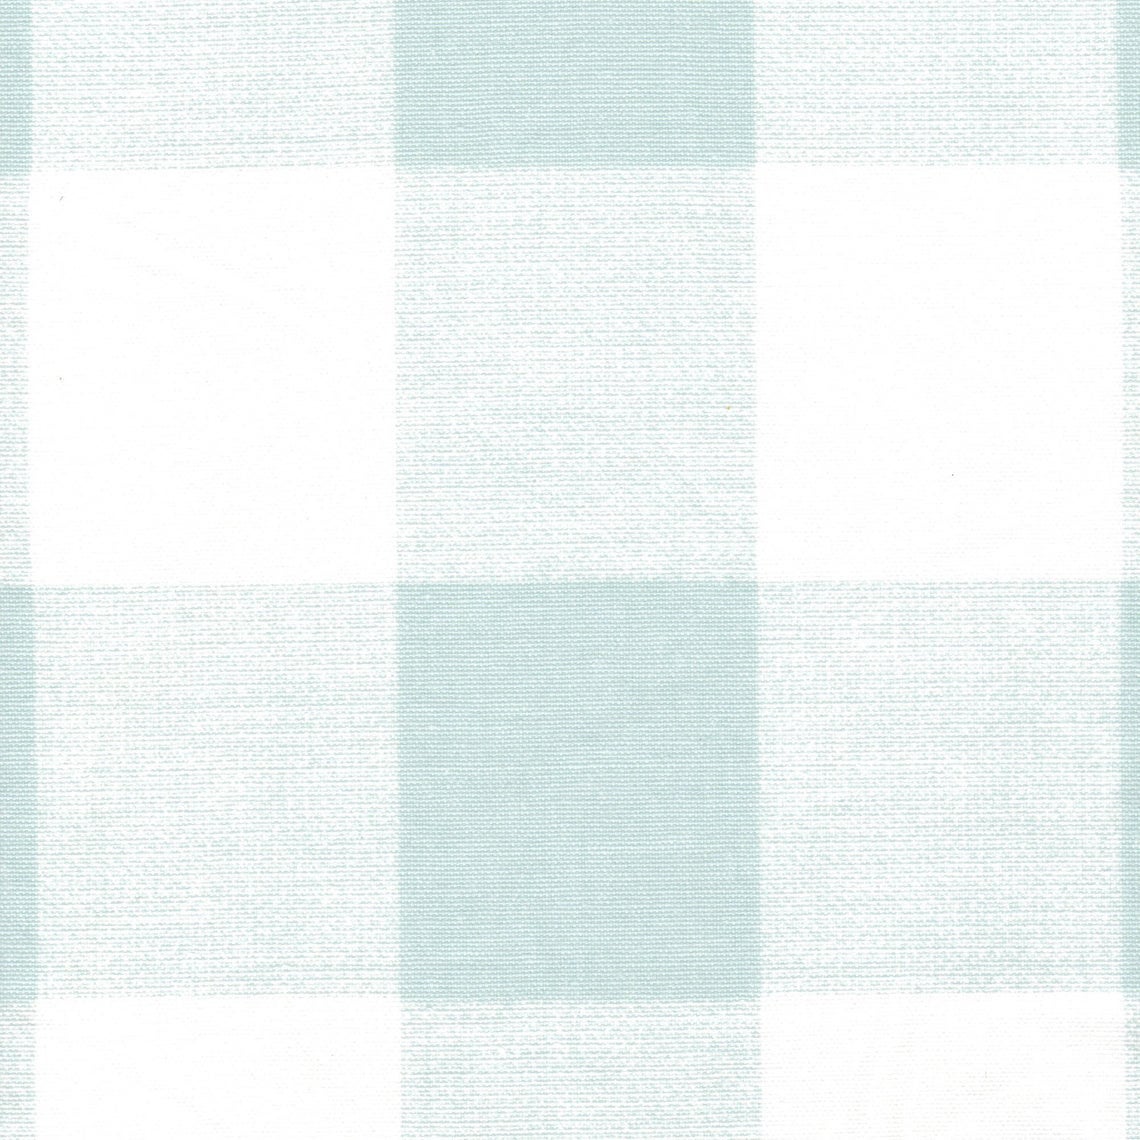 tailored bedskirt in anderson snowy pale blue-green buffalo check plaid